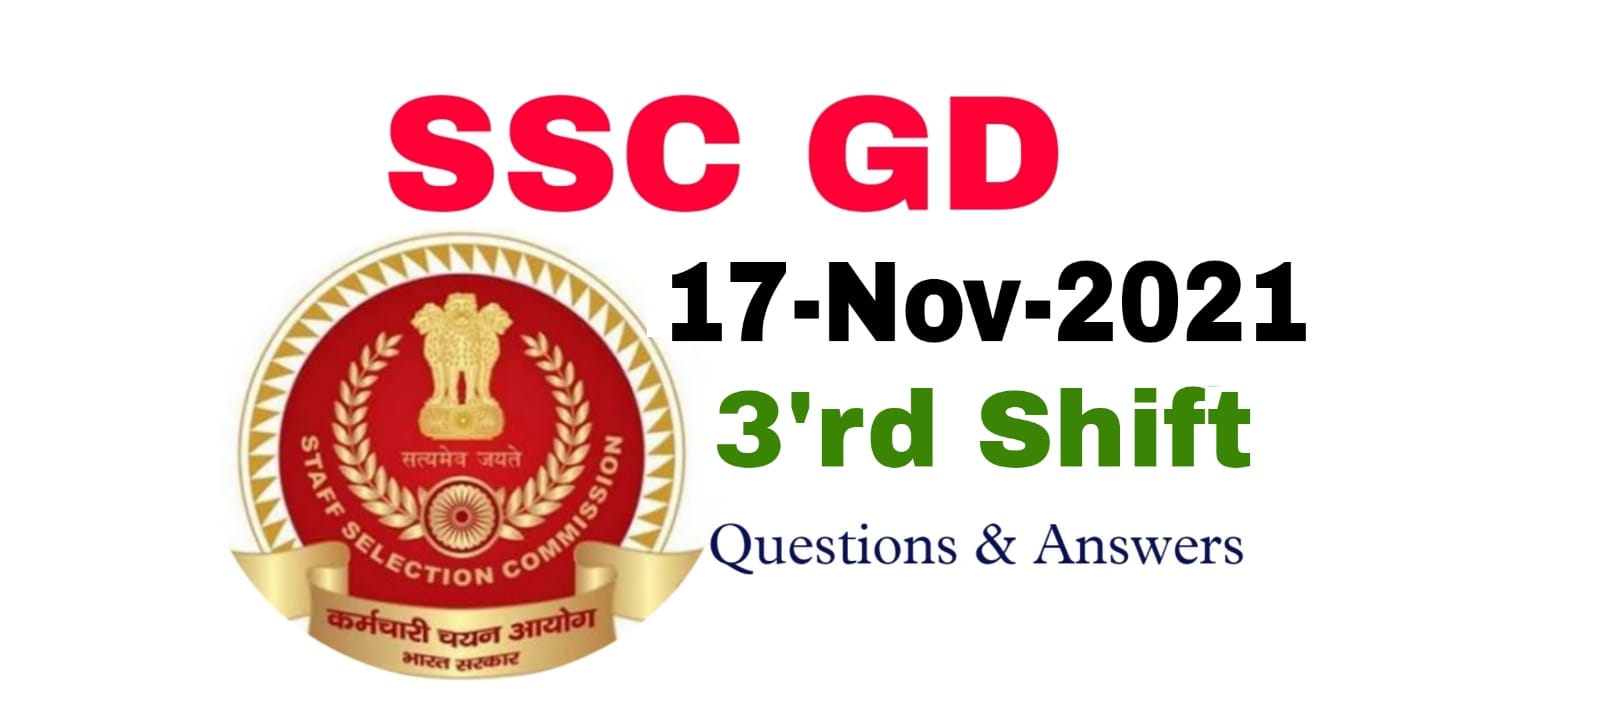 SSC GD 17 November 2021 3'rd Shift Questions and Answers